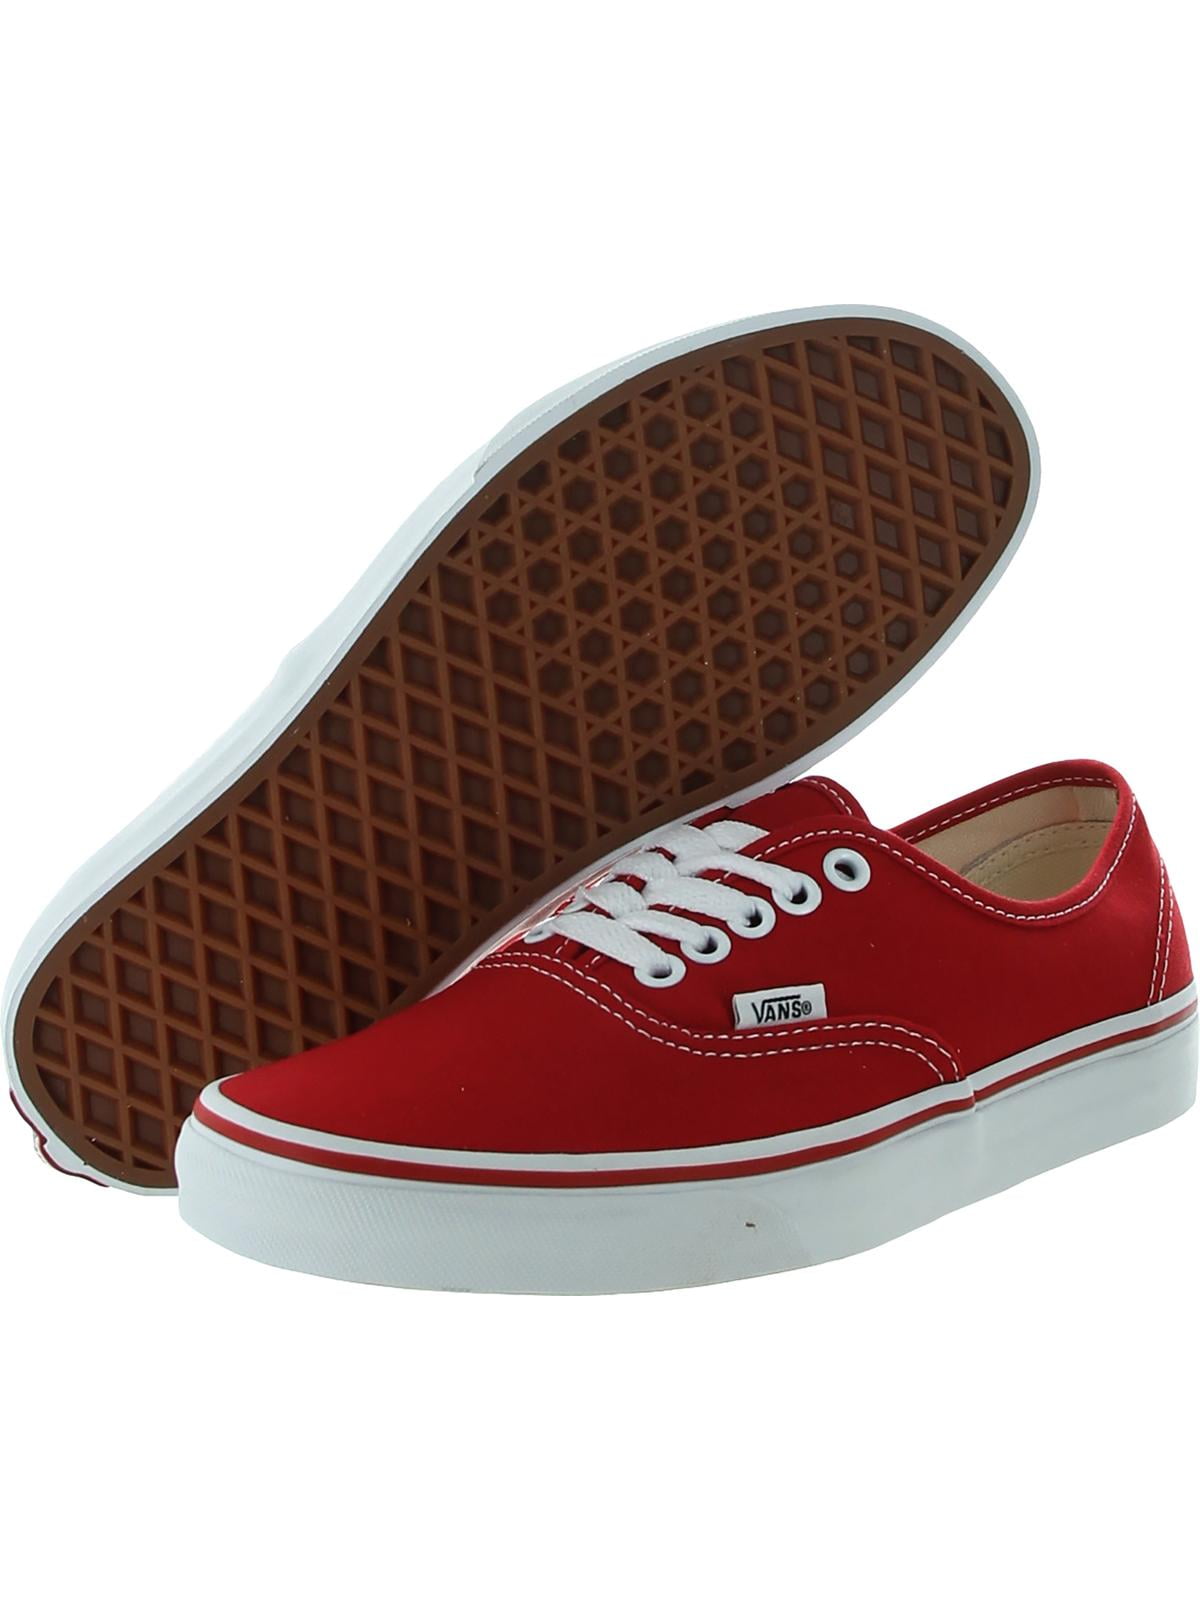 red vans shoes for boys